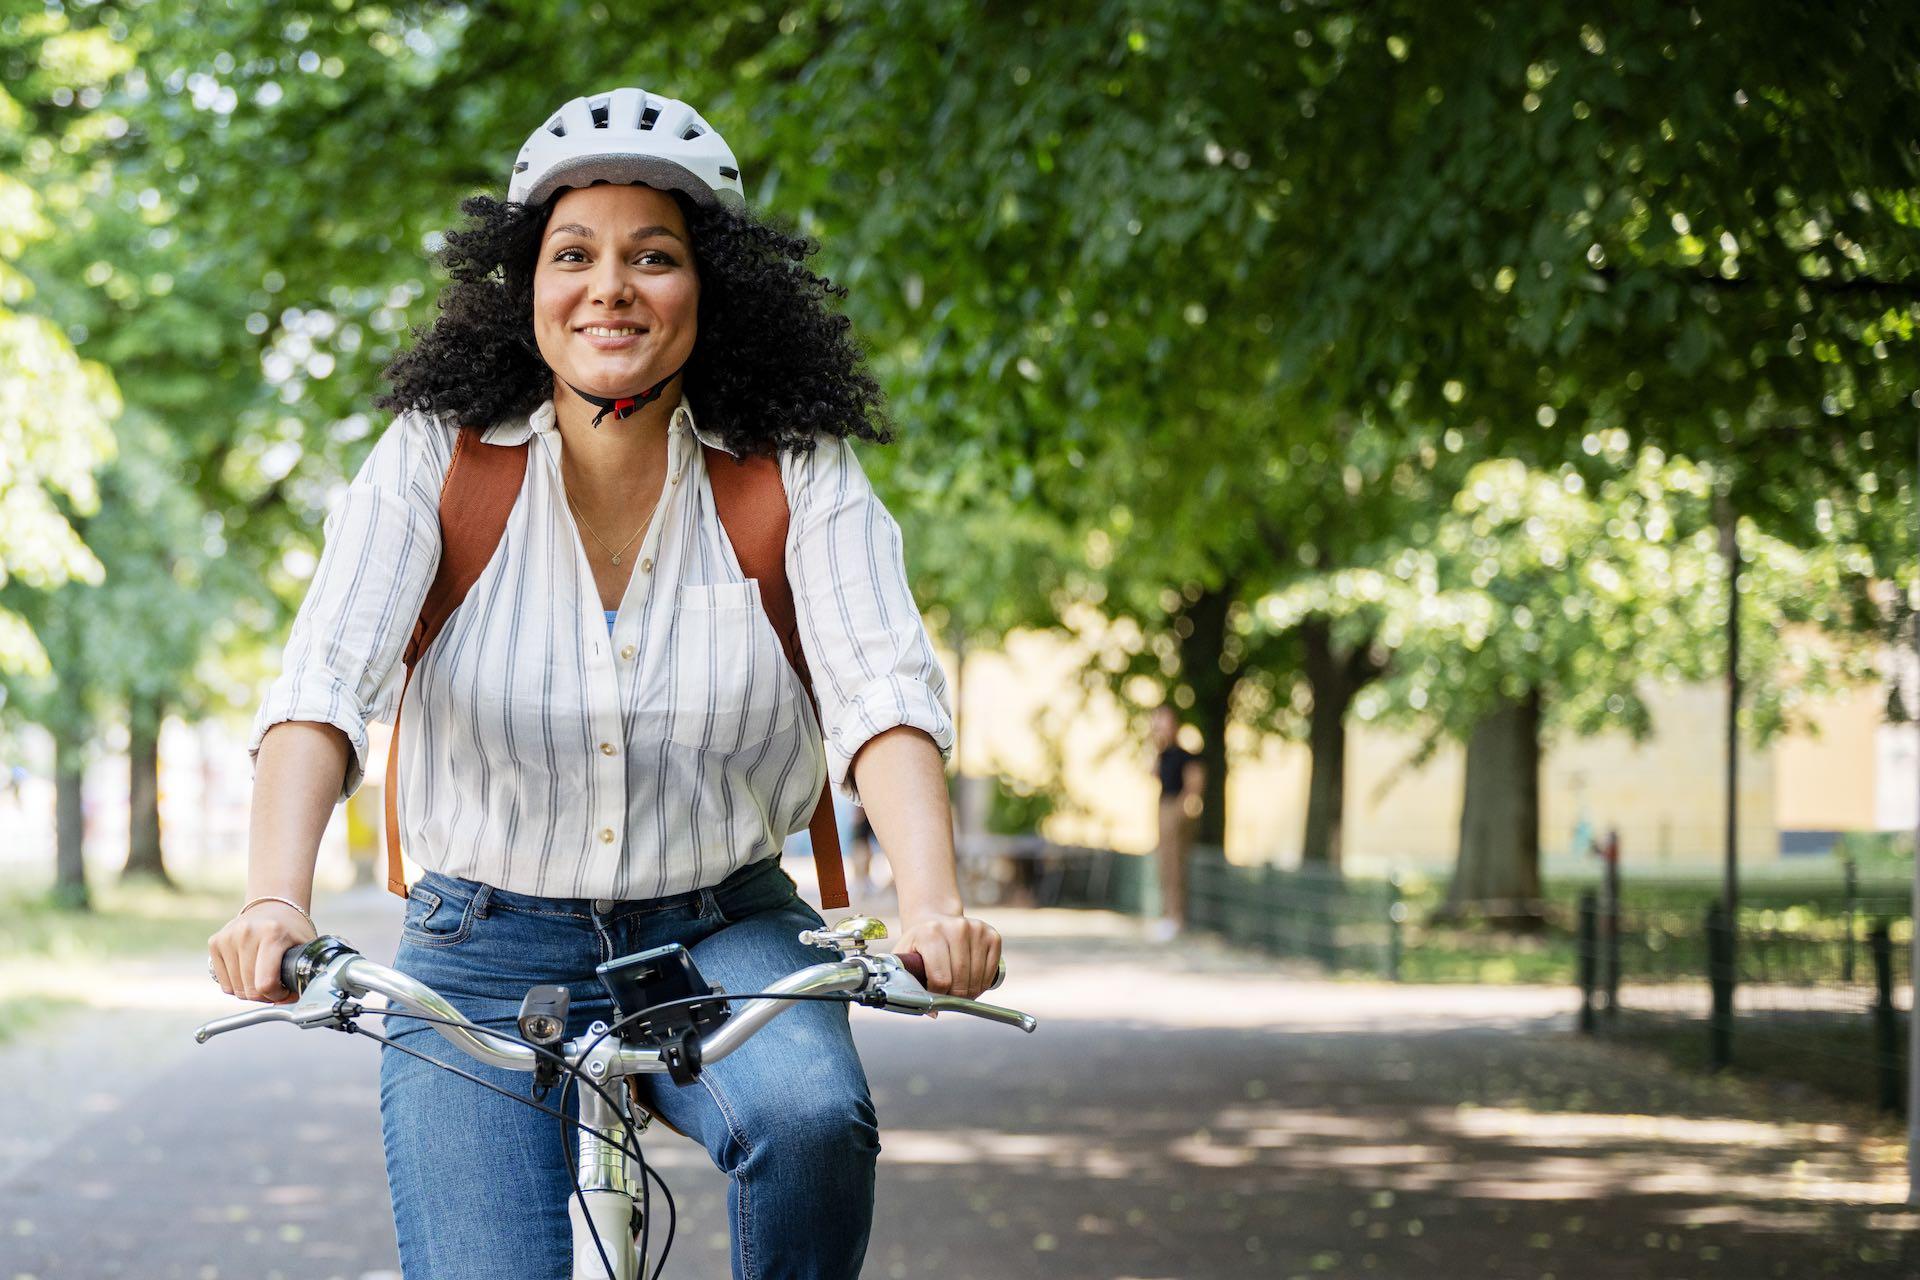 A woman is riding a bicycle